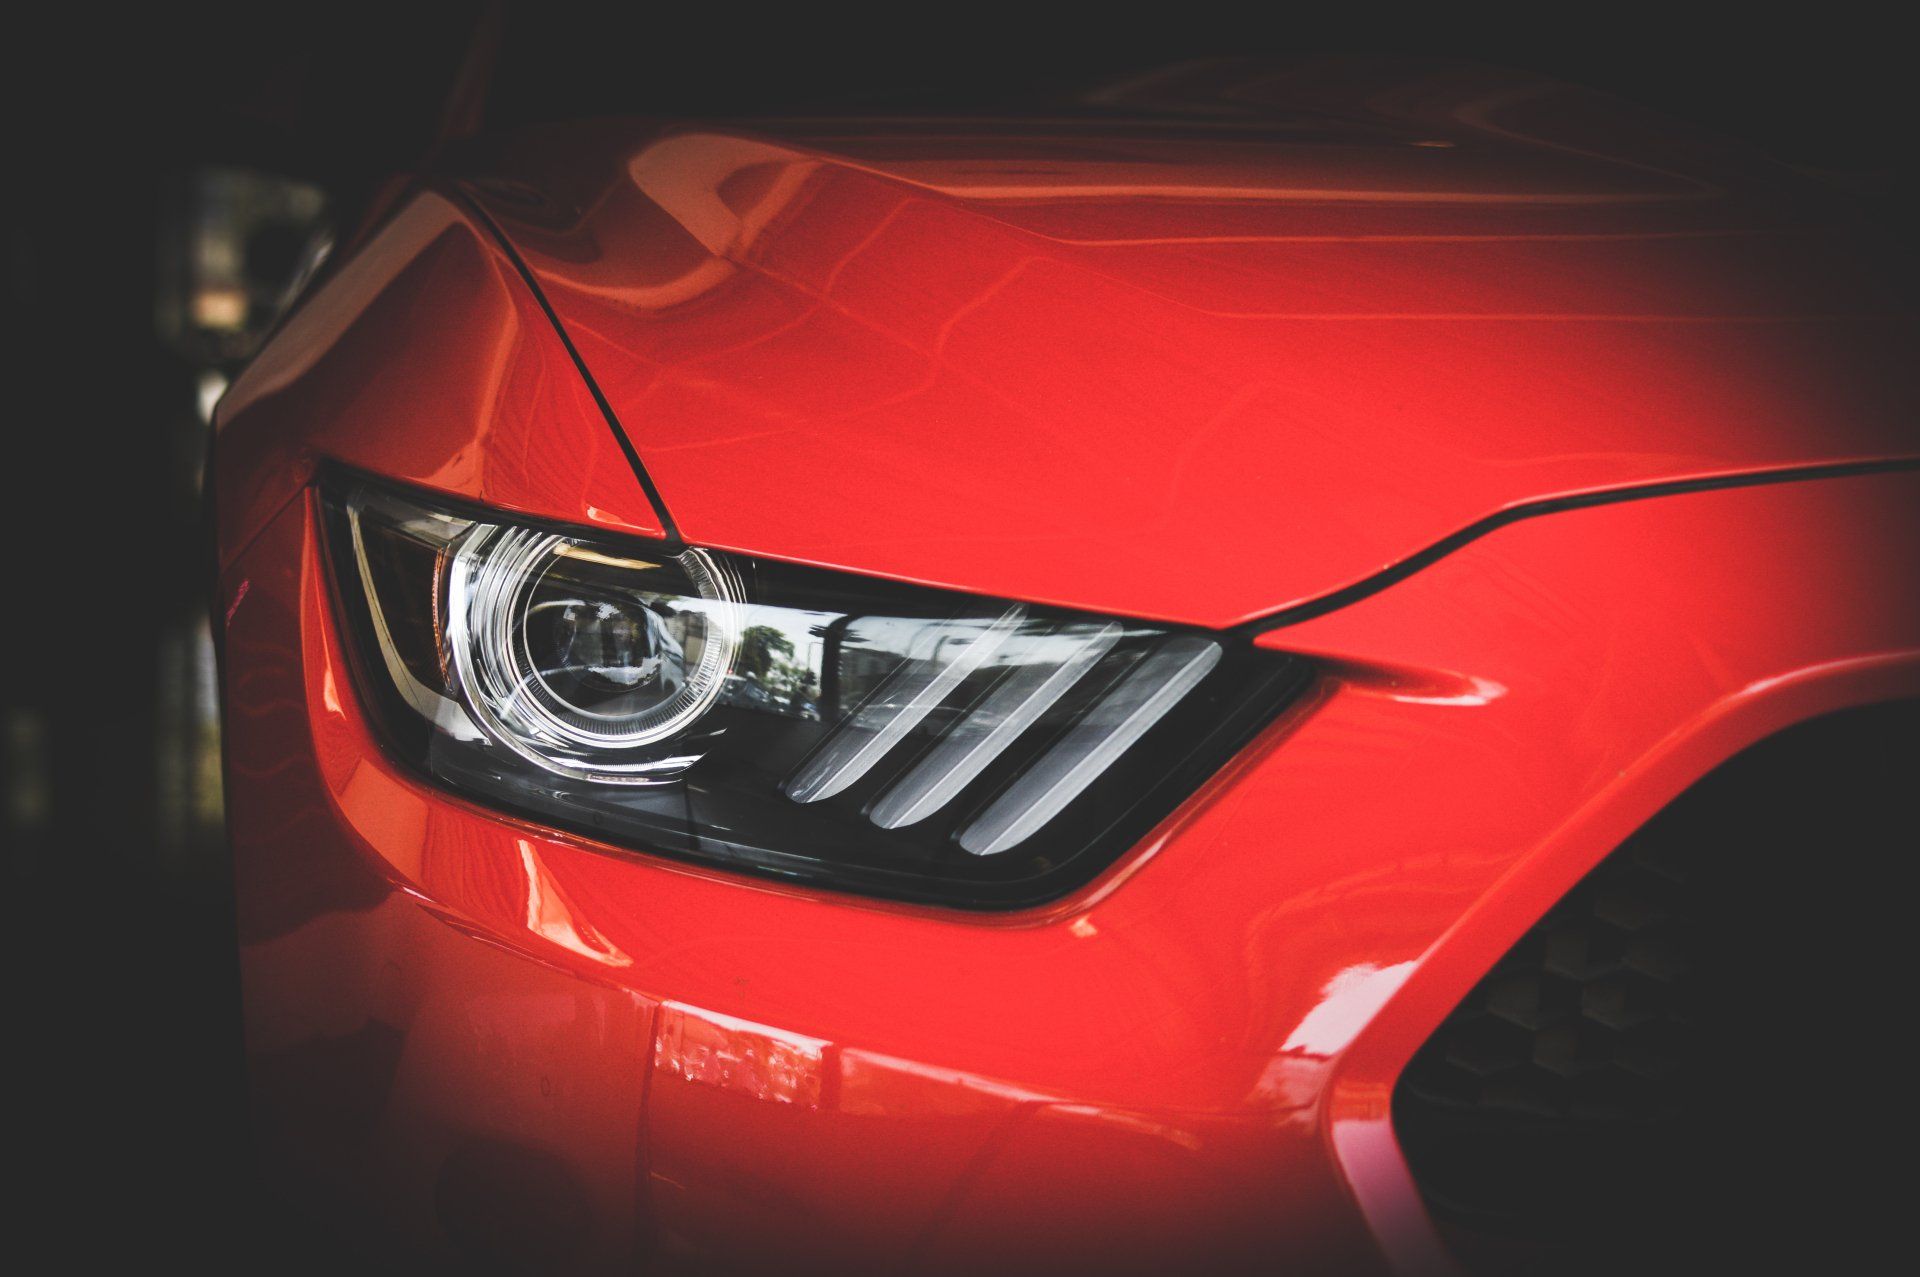 A close up of a red car 's headlight in a dark room.